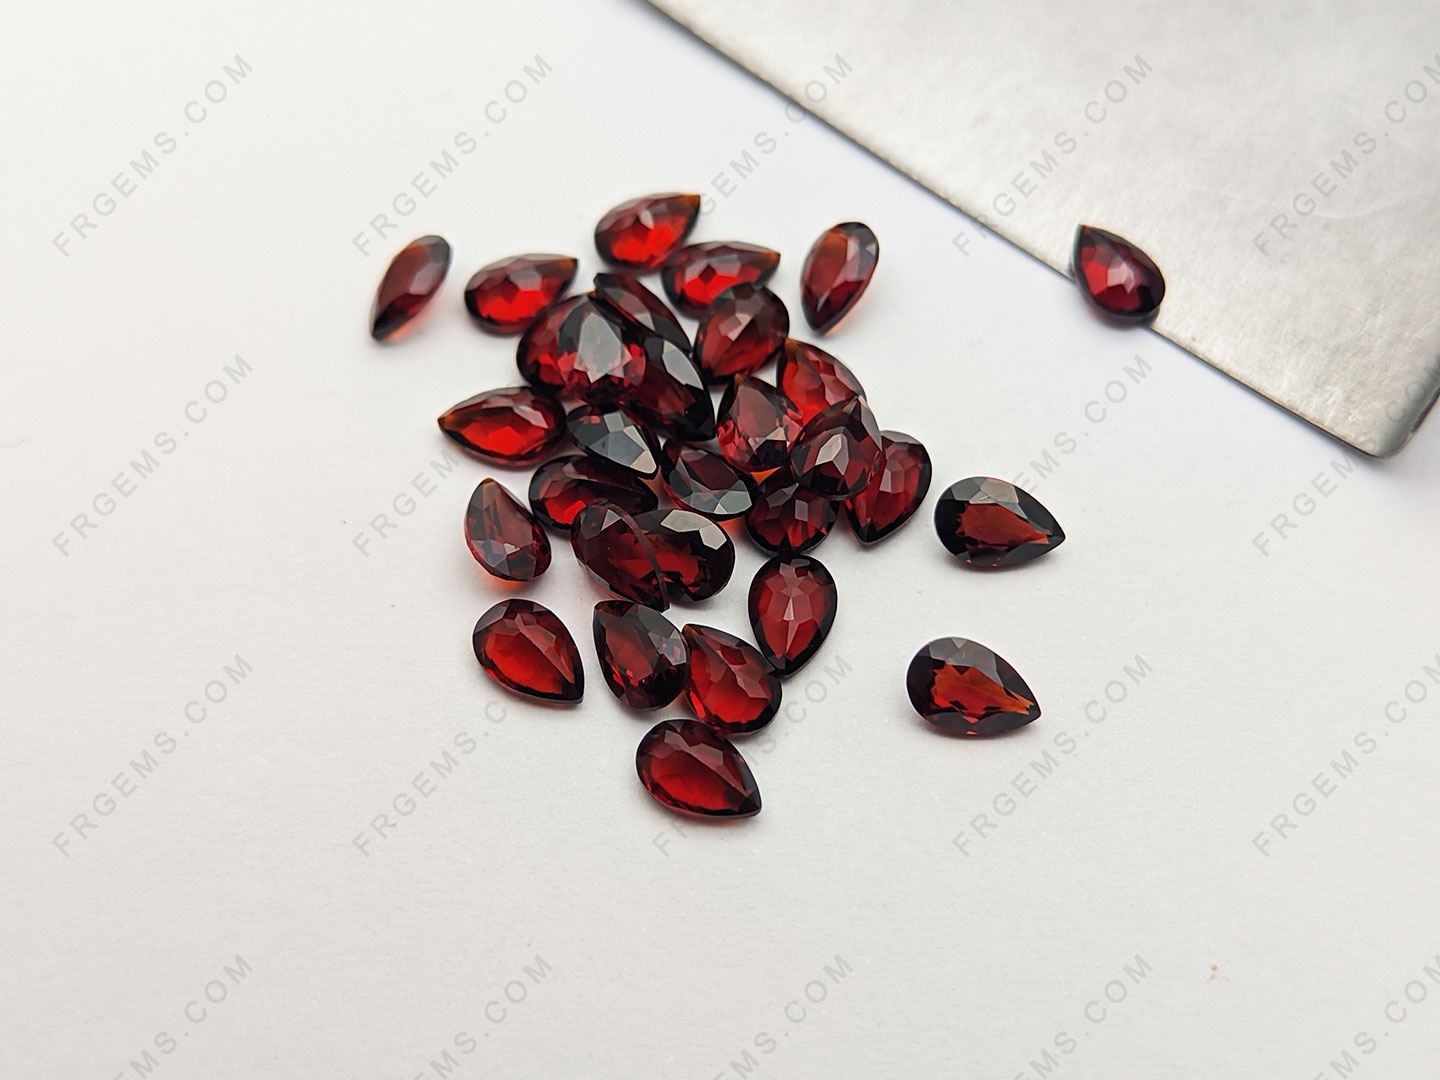 Bulk wholesale Loose Natural Garnet Red Pear Shape Faceted cut 6x4mm gemstones from China